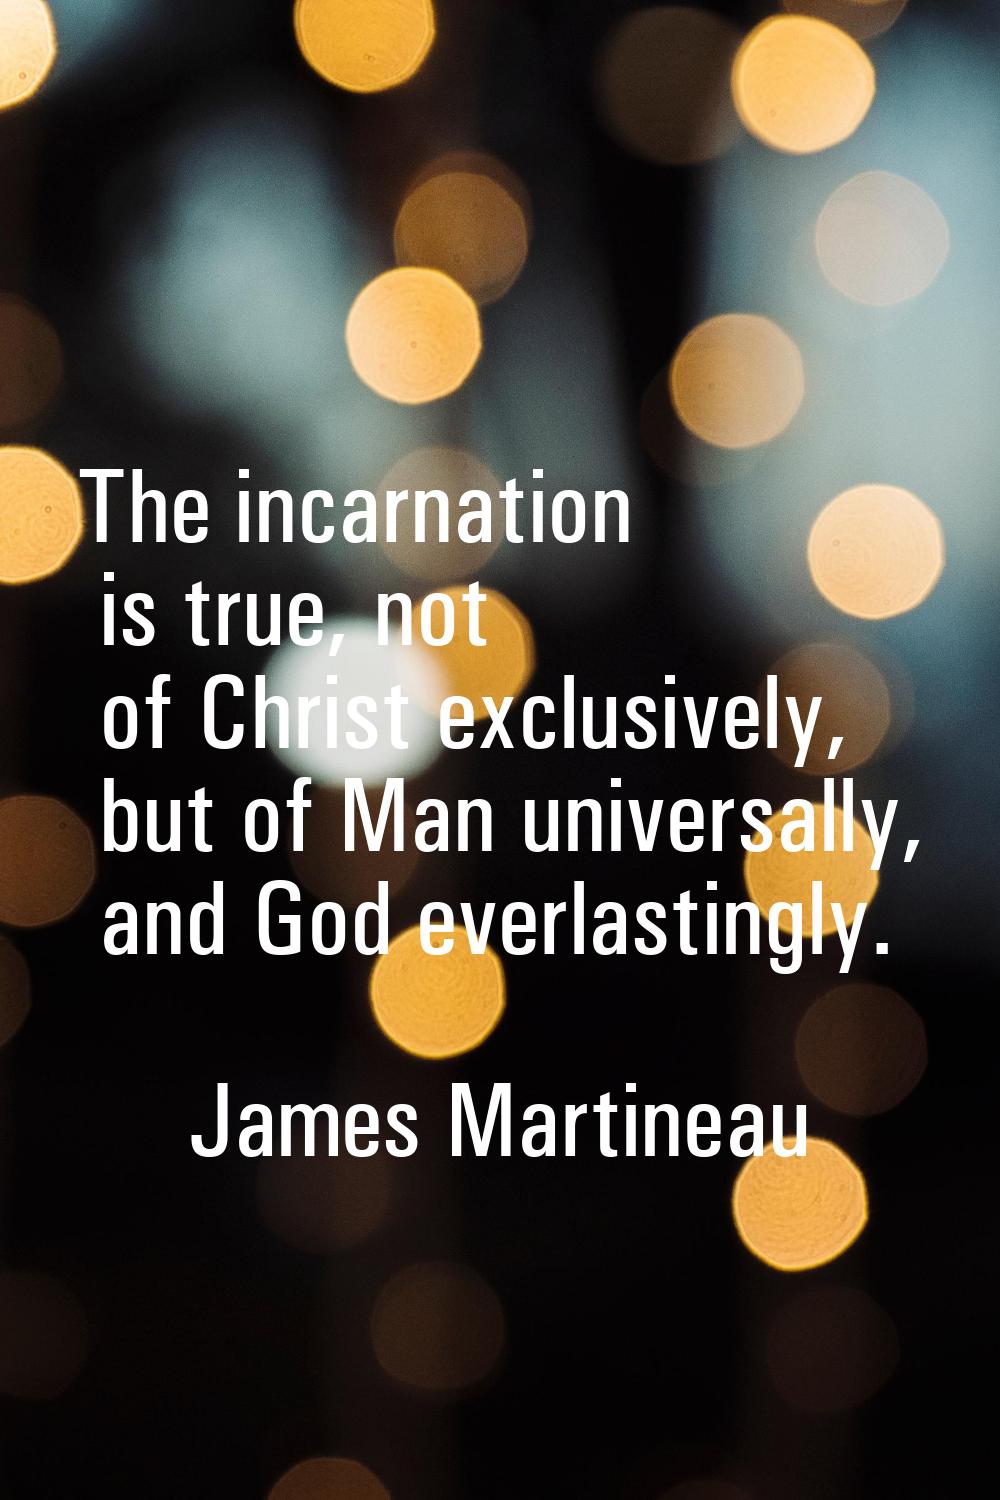 The incarnation is true, not of Christ exclusively, but of Man universally, and God everlastingly.